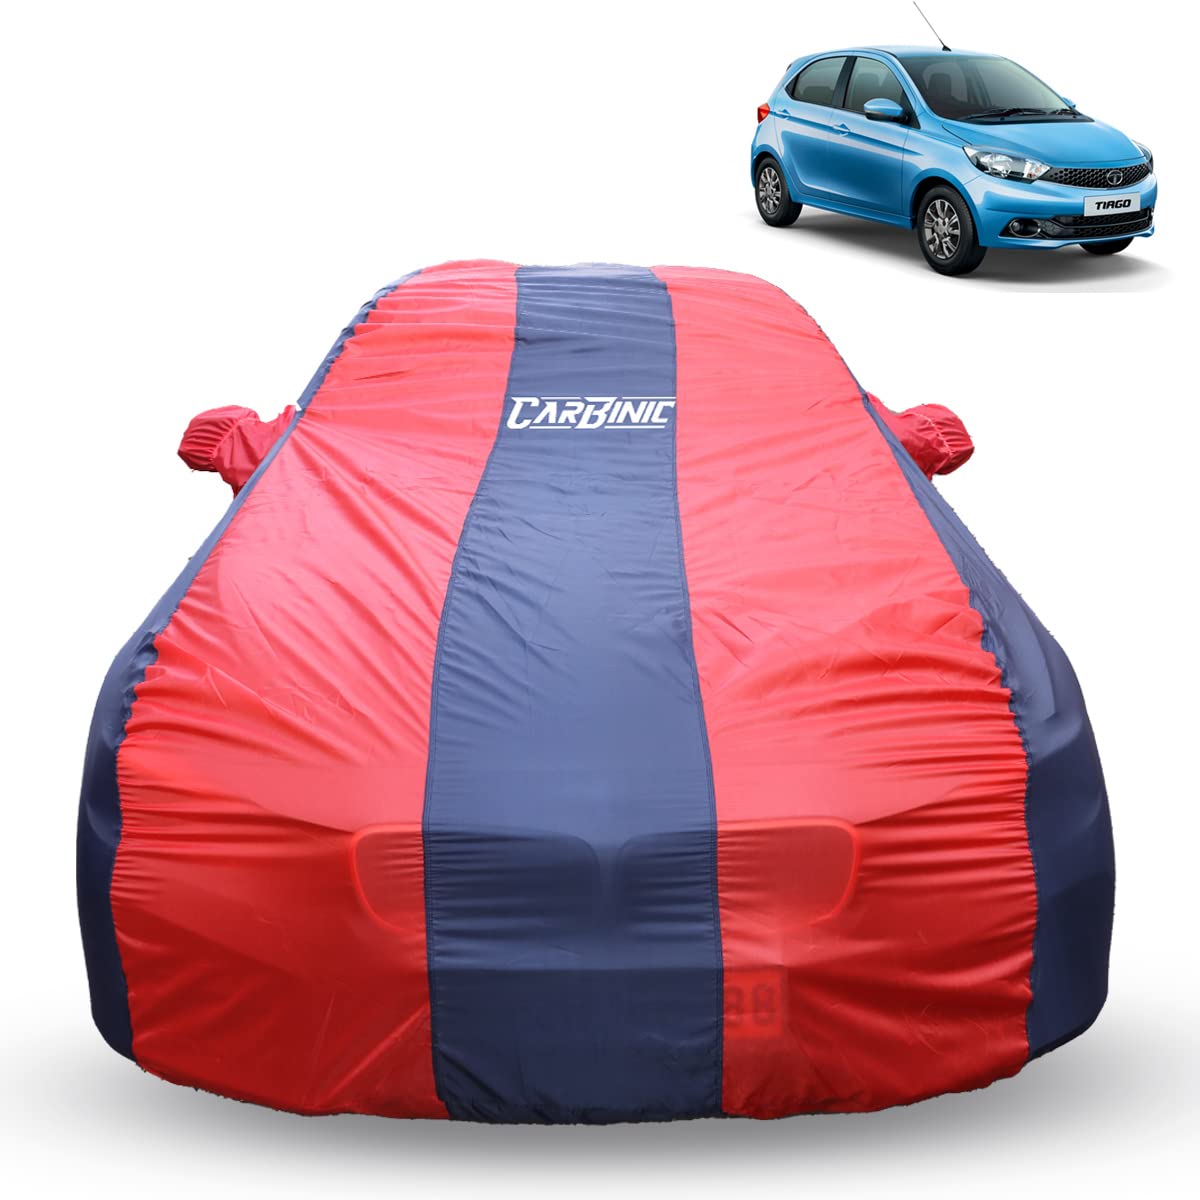 CARBINIC Car Body Cover for Tata Tiago 2021 | Water Resistant, UV Protection Car Cover | Scratchproof Body Shield | Dustproof All-Weather Cover | Mirror Pocket & Antenna | Car Accessories, Blue Red